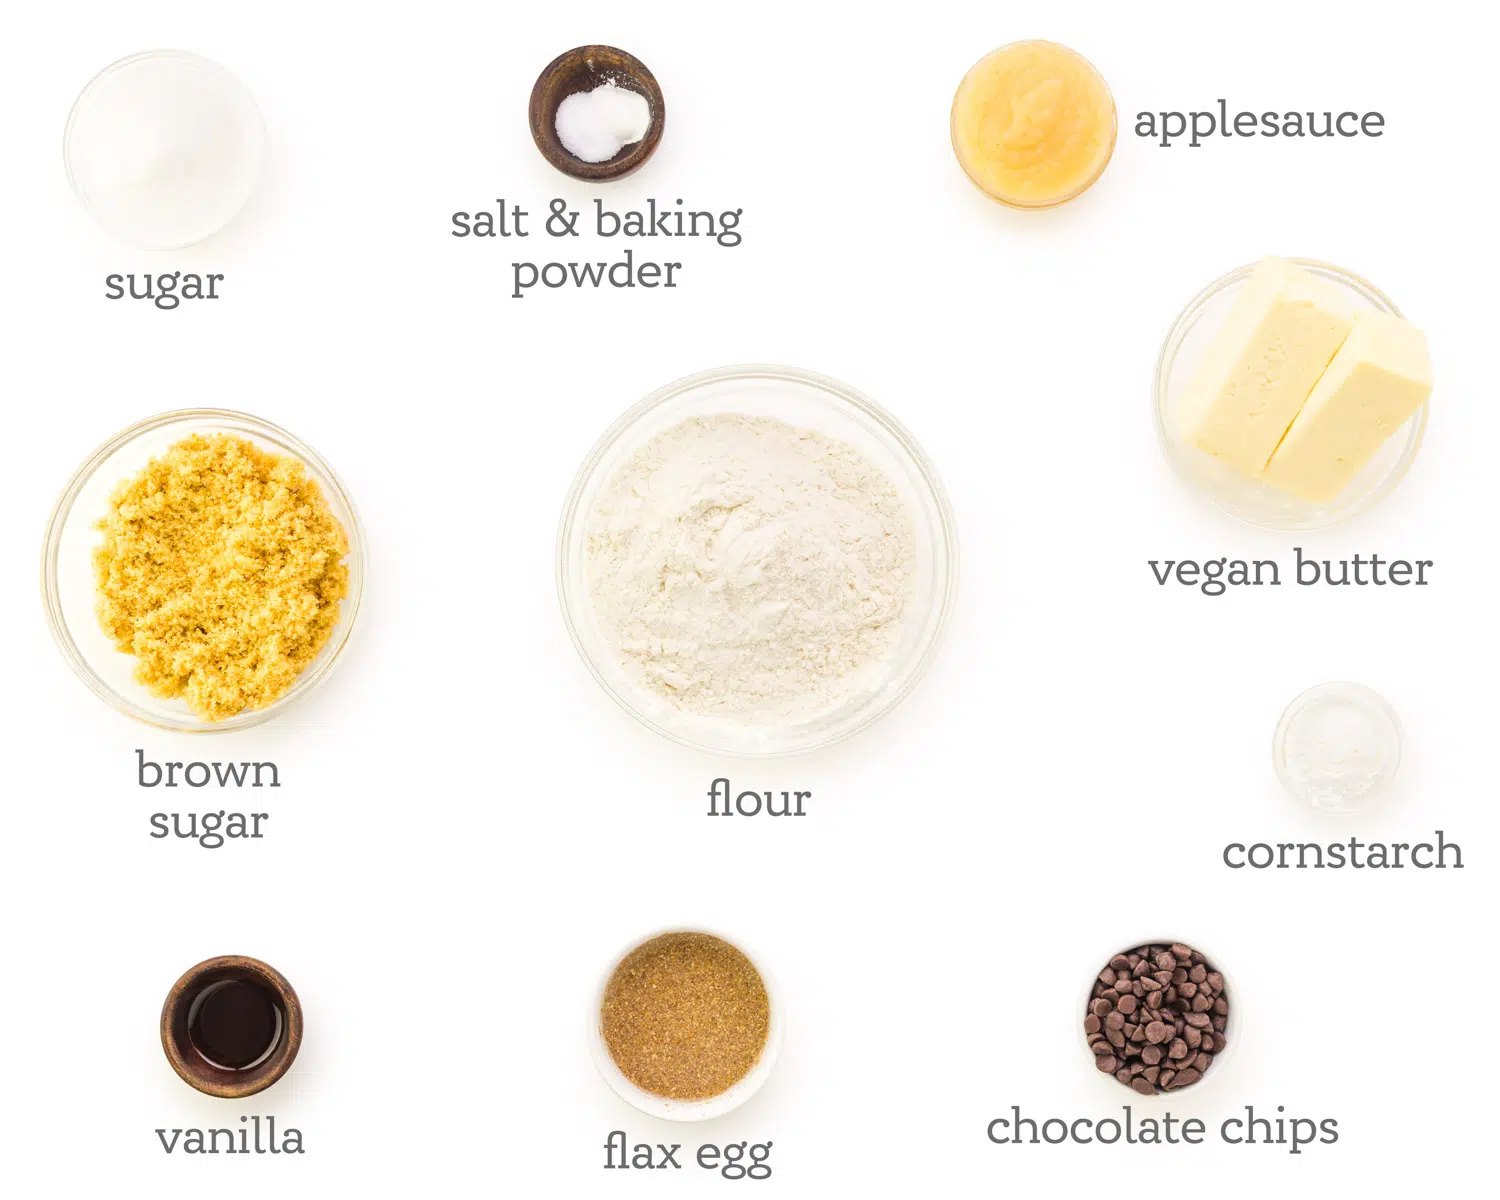 Ingredients are displayed on a counter. The labels next to them read, applesauce, vegan butter, cornstarch, chocolate chips, flax egg, vanilla, brown sugar, sugar, salt & baking powder, and flour.